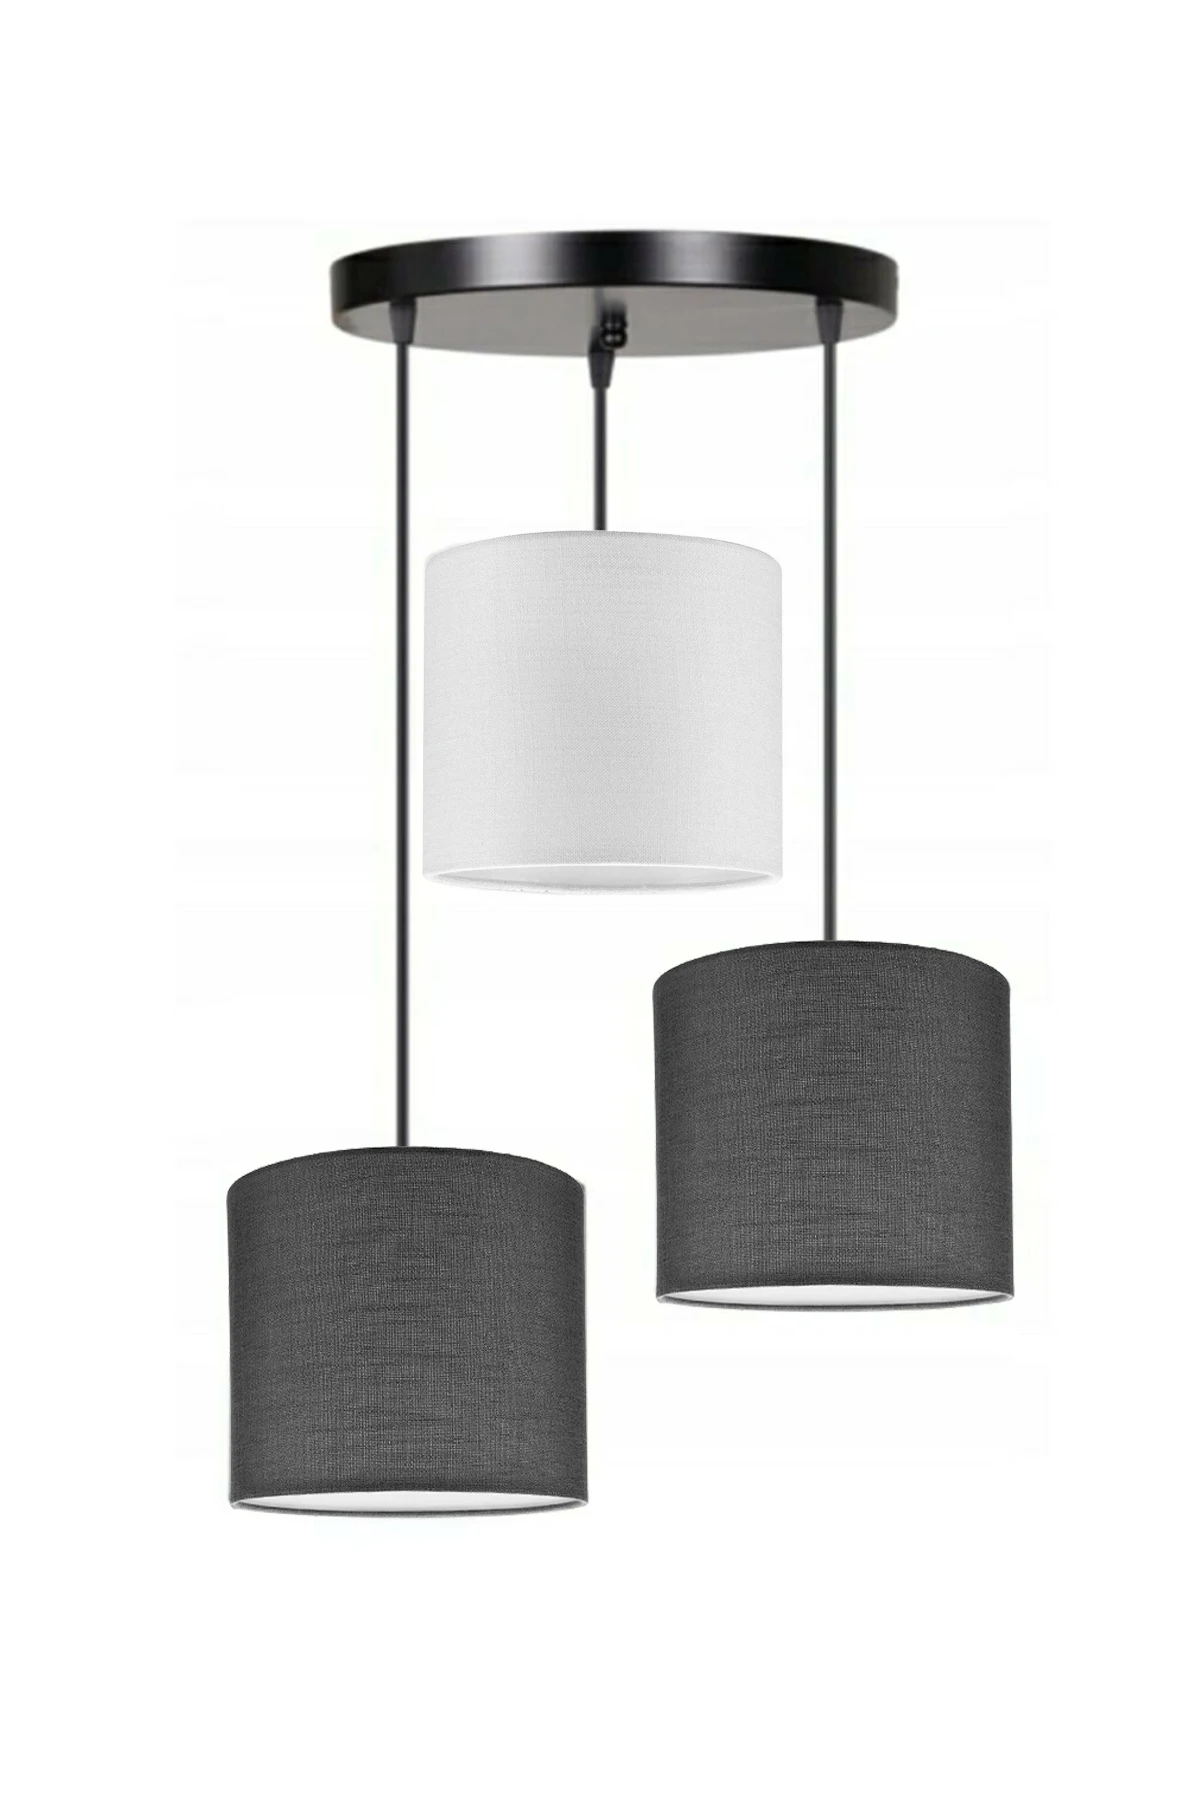 3 Heads 2 Dark Gray 1 White Cylinder Fabric Lampshade Pendant Lamp Chandelier Modern Decorative Design For Home Hotel Office Use